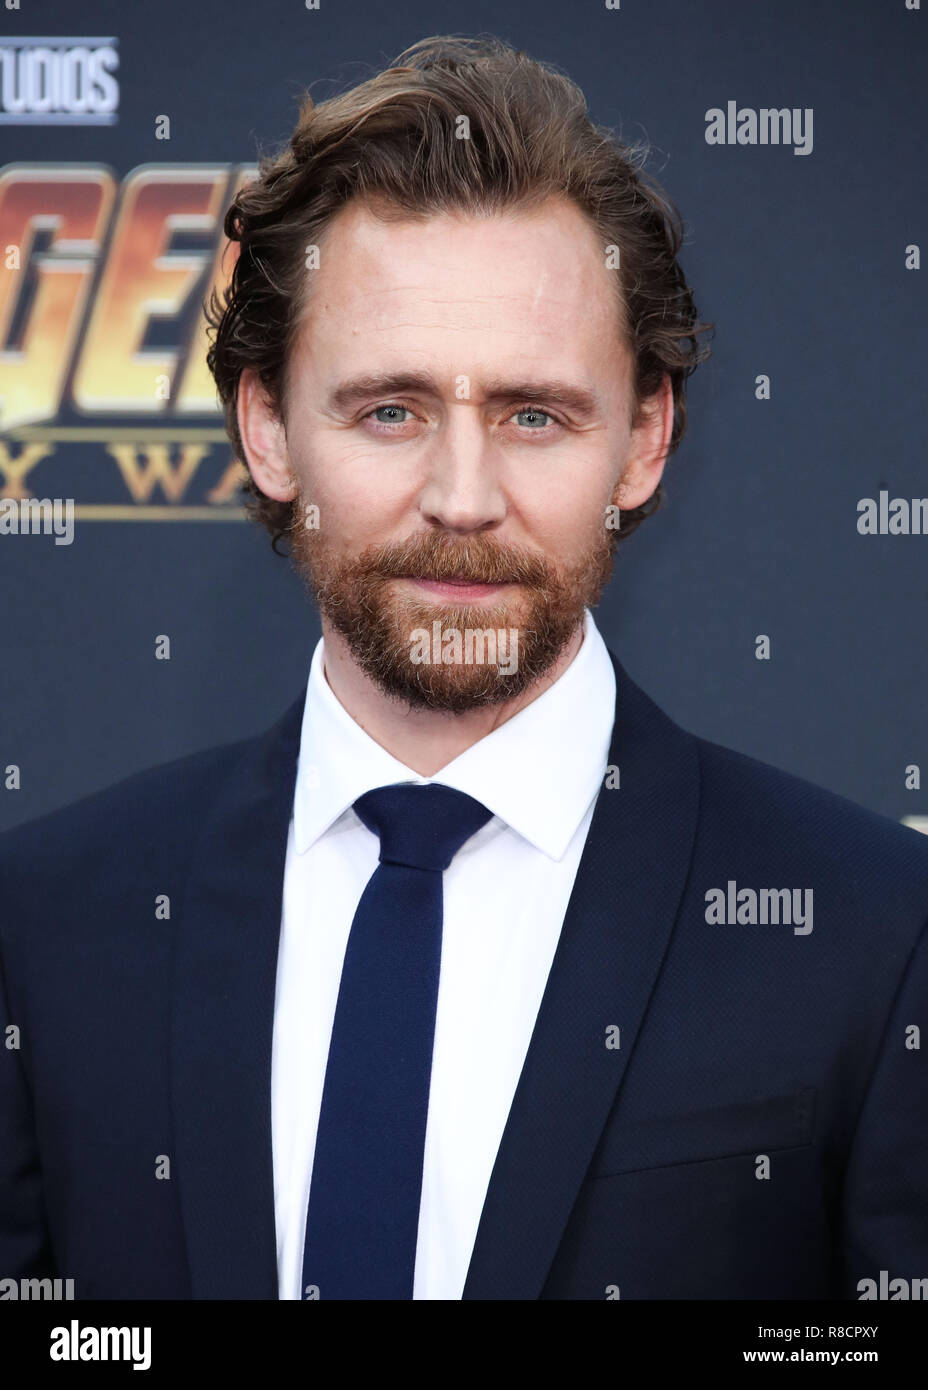 HOLLYWOOD, LOS ANGELES, CA, USA - APRIL 23: Tom Hiddleston at the World Premiere Of Disney And Marvel's 'Avengers: Infinity War' held at the El Capitan Theatre, Dolby Theatre and TCL Chinese Theatre IMAX on April 23, 2018 in Hollywood, Los Angeles, California, United States. (Photo by Xavier Collin/Image Press Agency) Stock Photo